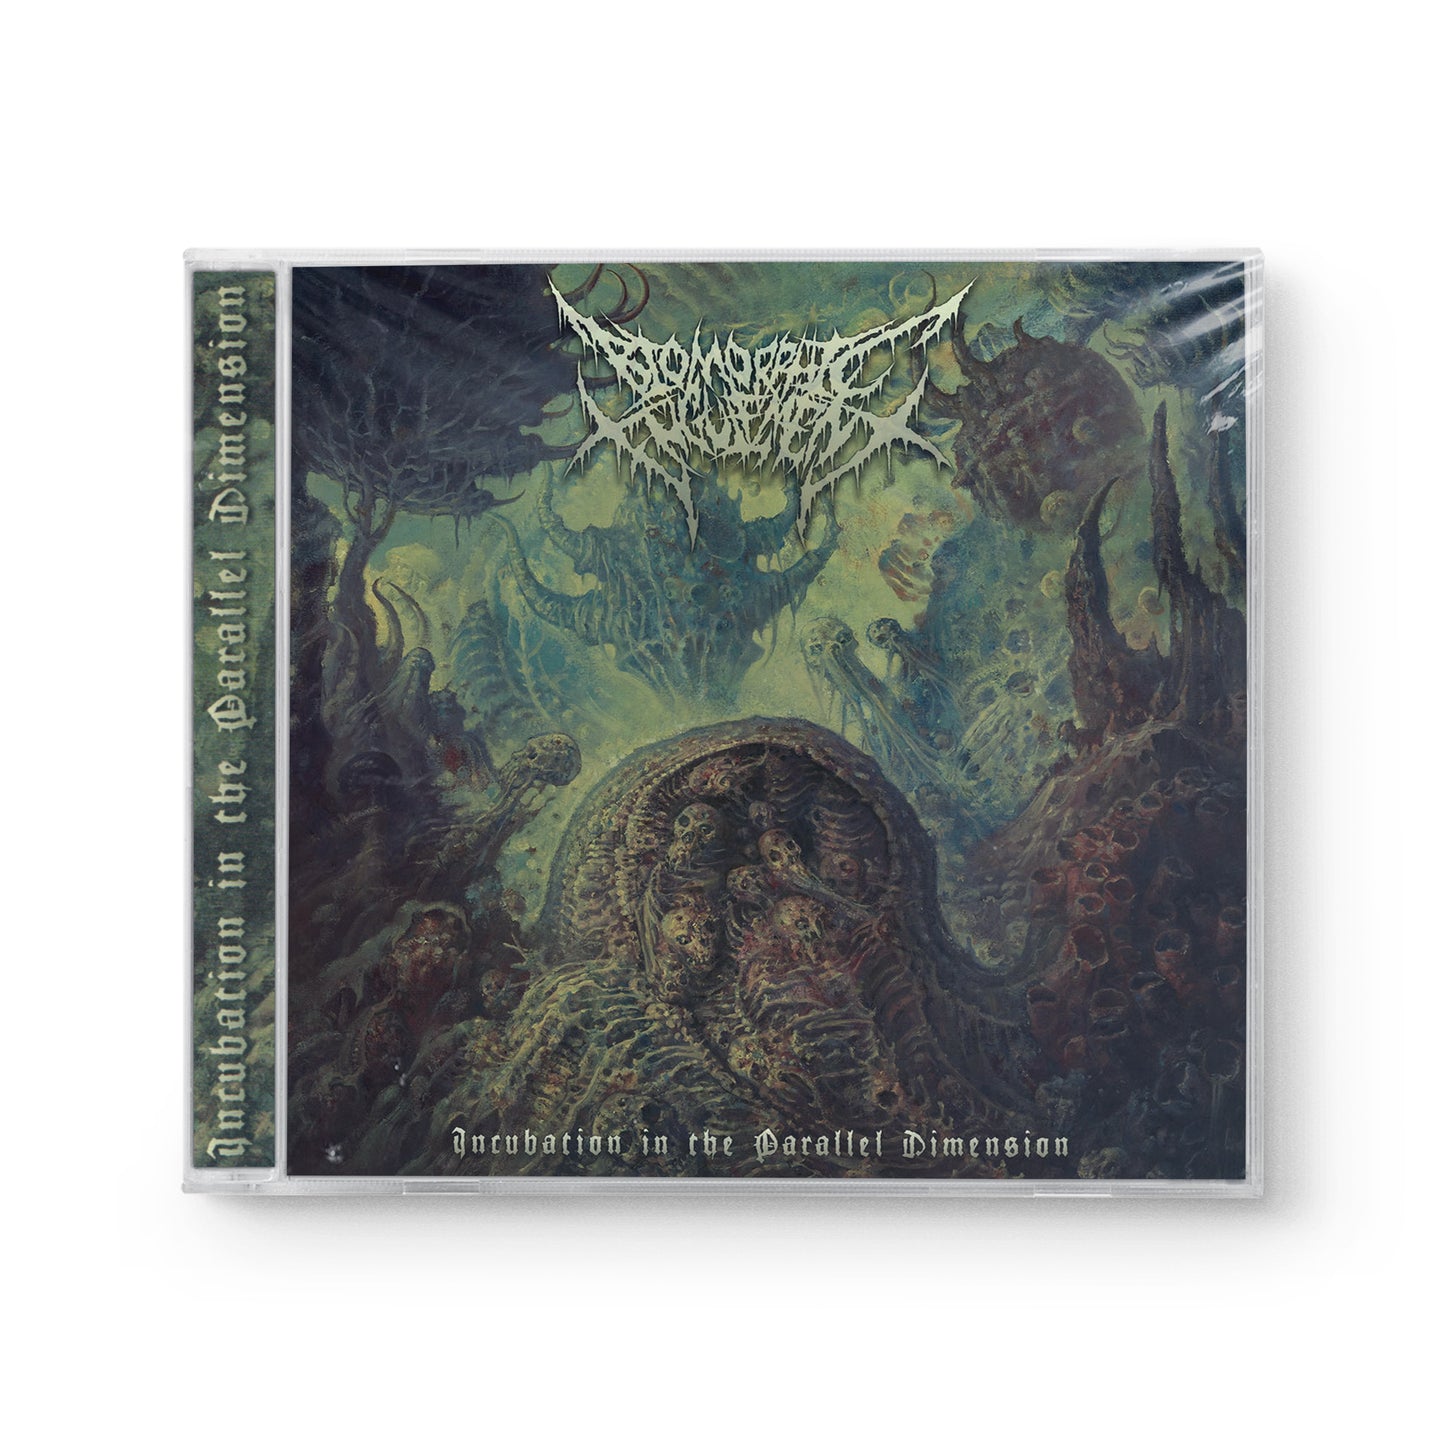 Biomorphic Engulfment "Incubation In The Parallel Dimension" CD